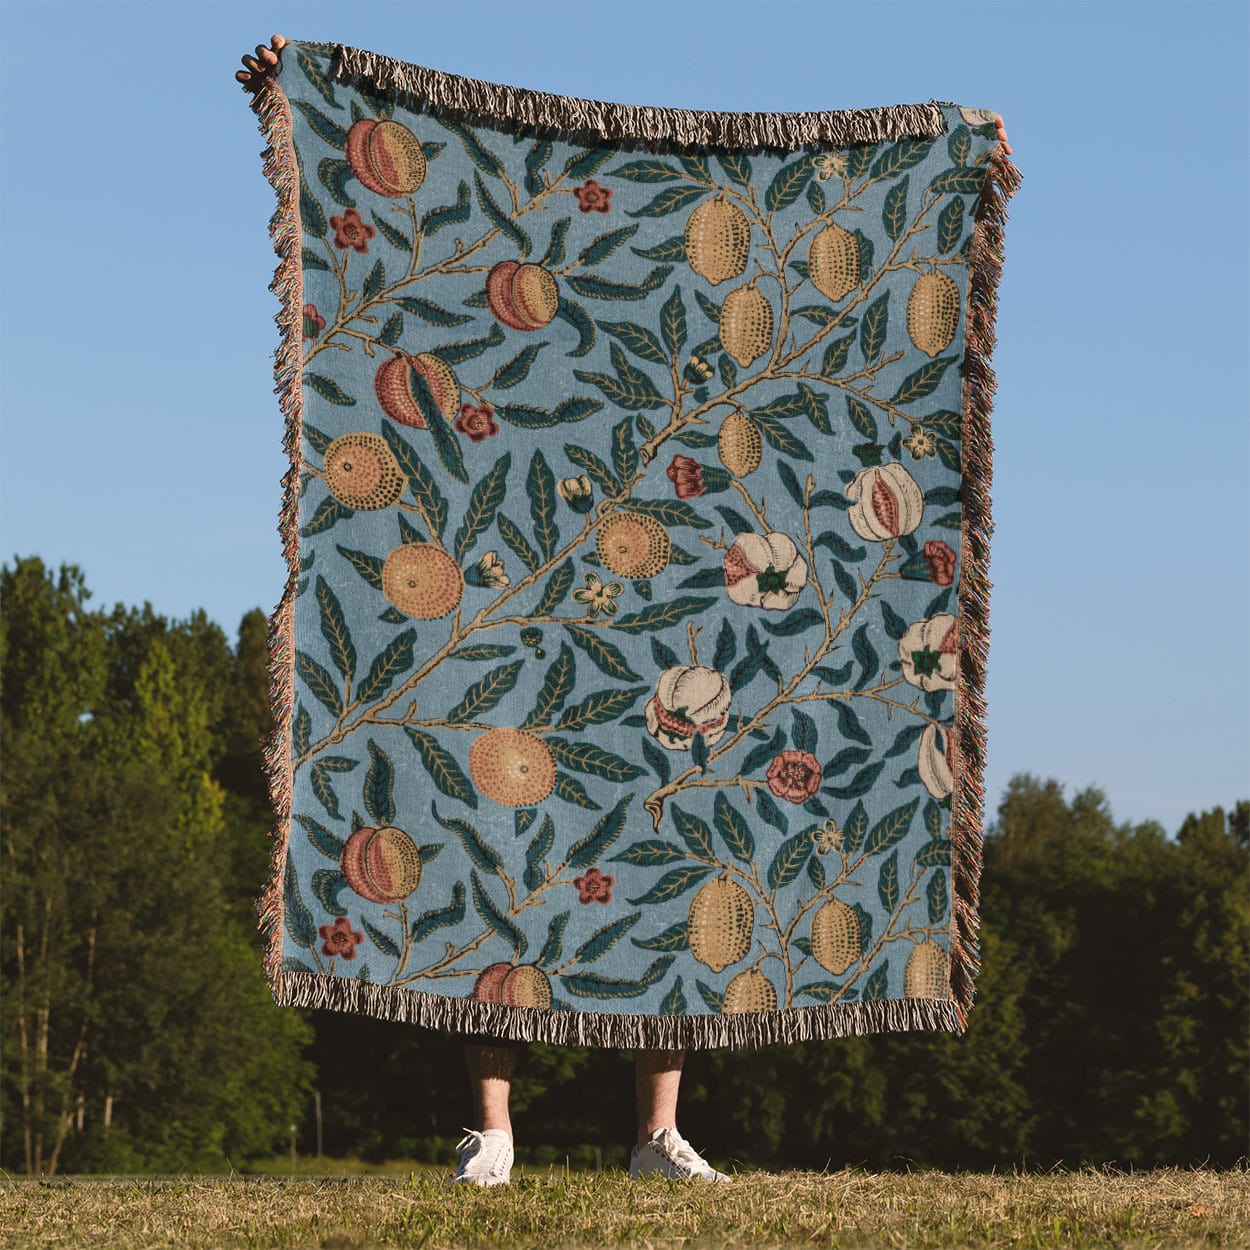 Eclectic Plants Woven Blanket Held Up Outside